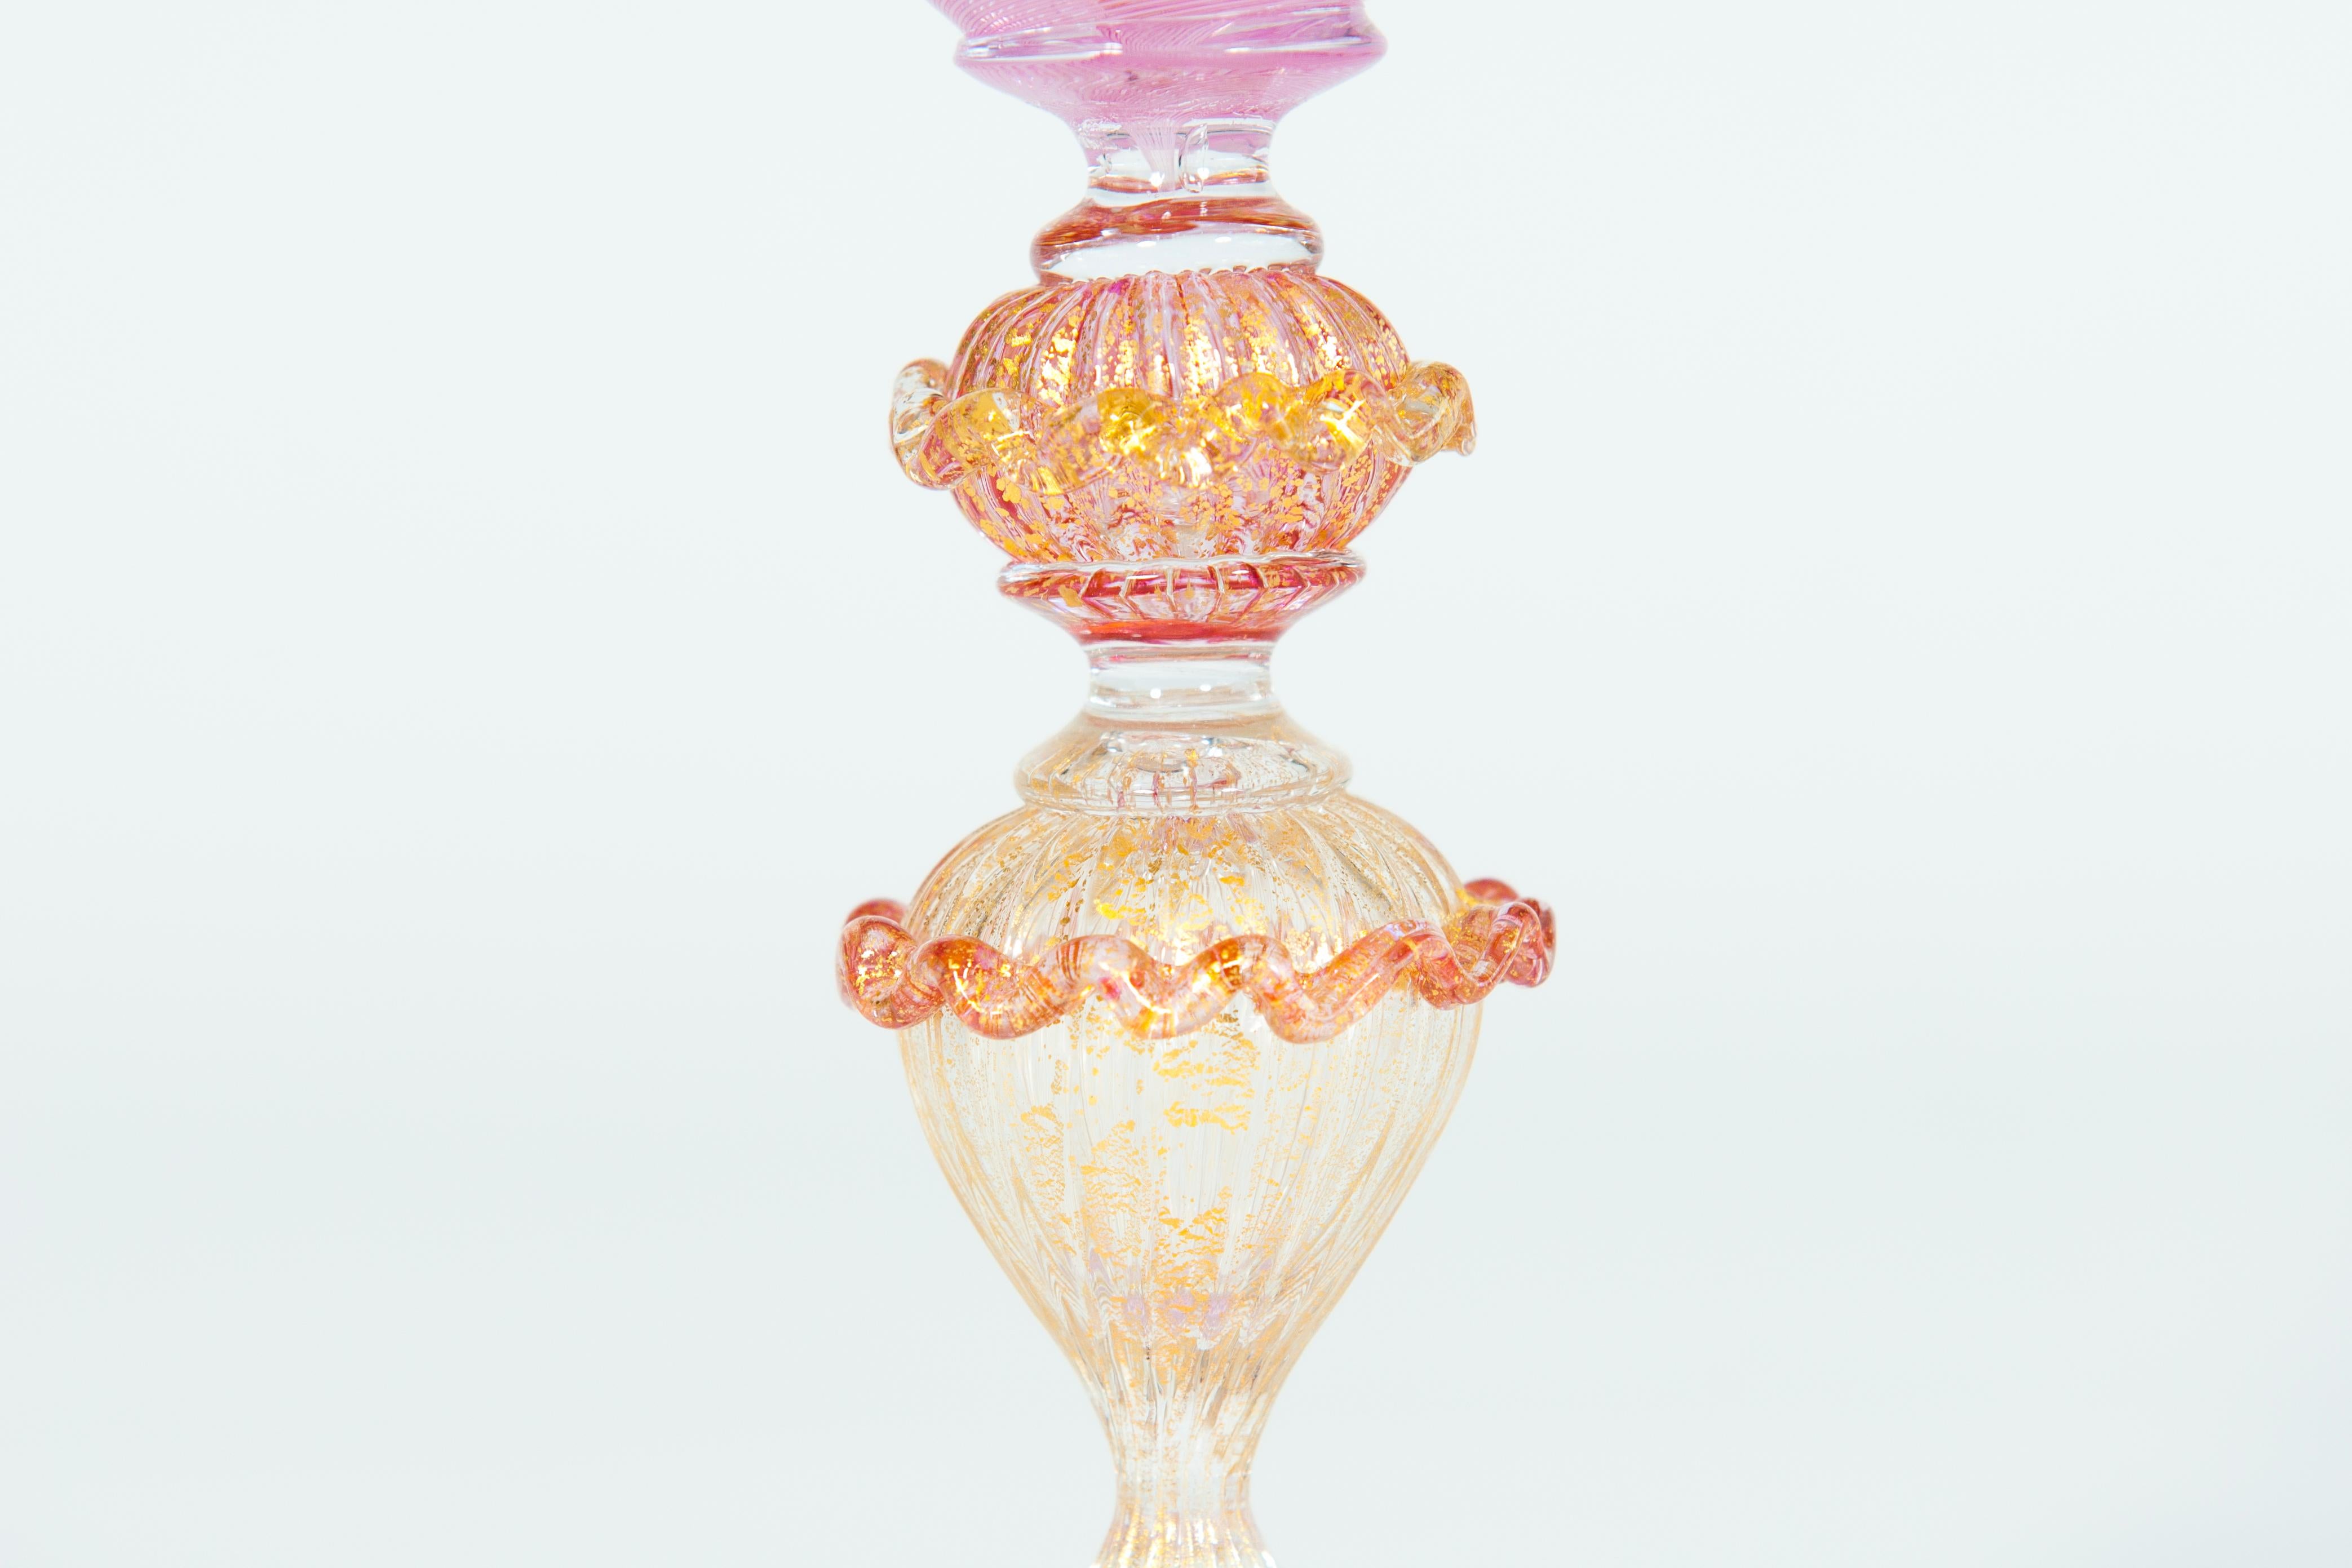 Hand-Crafted Elegant Pink Goblet in Murano Glass with “Morise” Decorations, Italy, 1990s